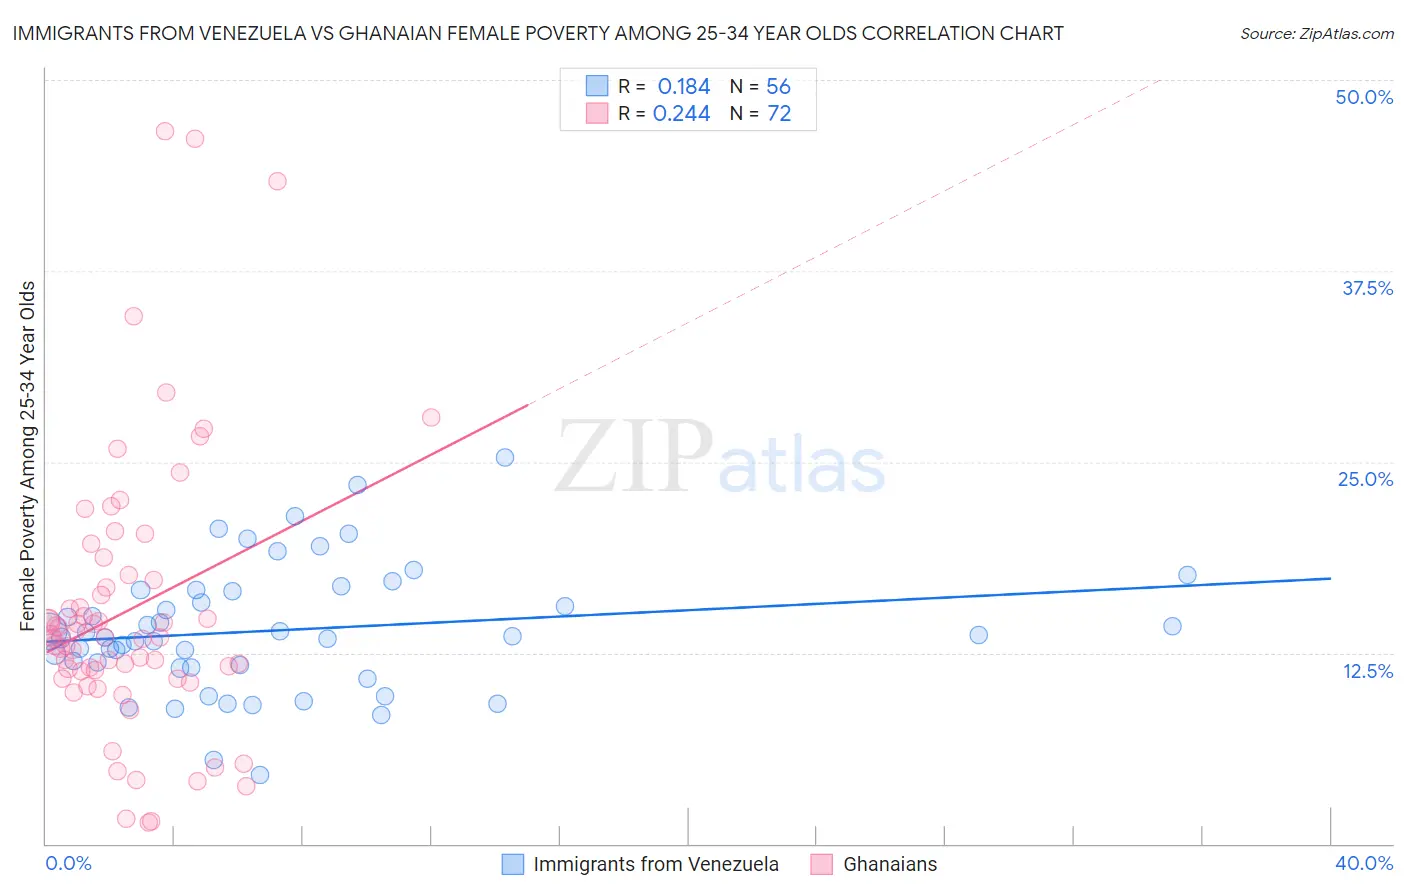 Immigrants from Venezuela vs Ghanaian Female Poverty Among 25-34 Year Olds